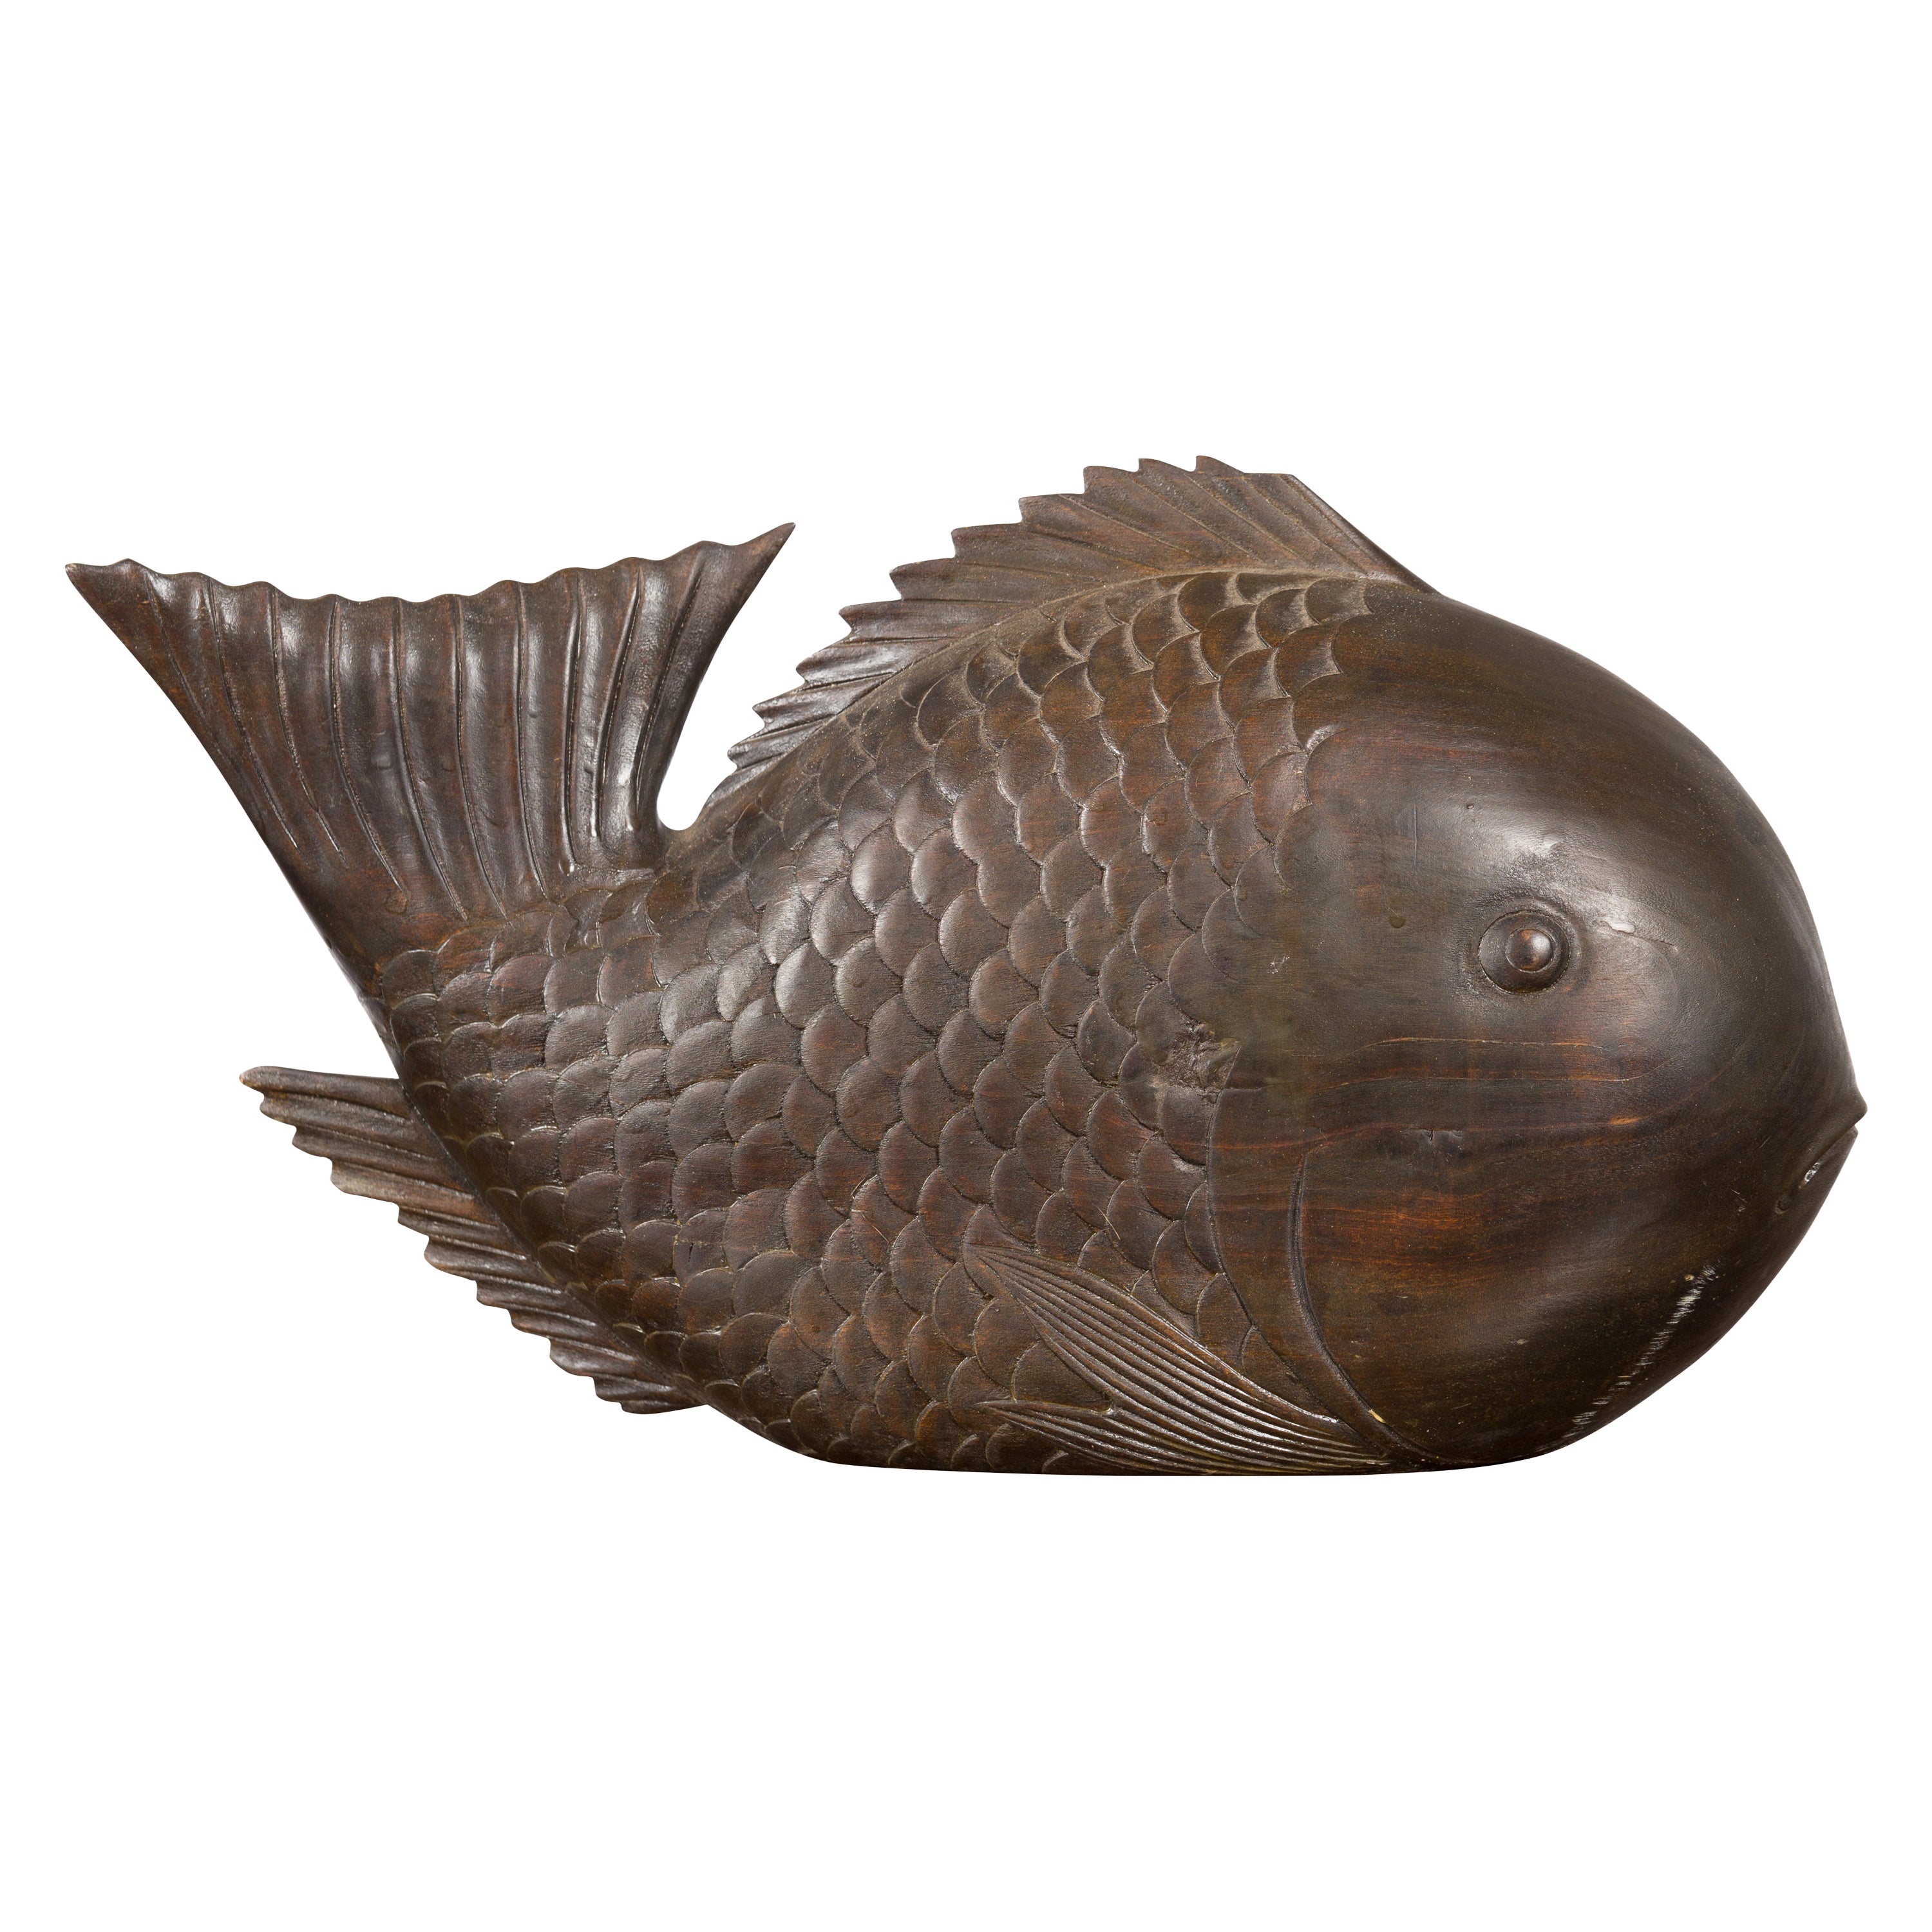 Vintage Thai Carved Wooden Carp Sculpture with Detailed Scales and Dark Patina